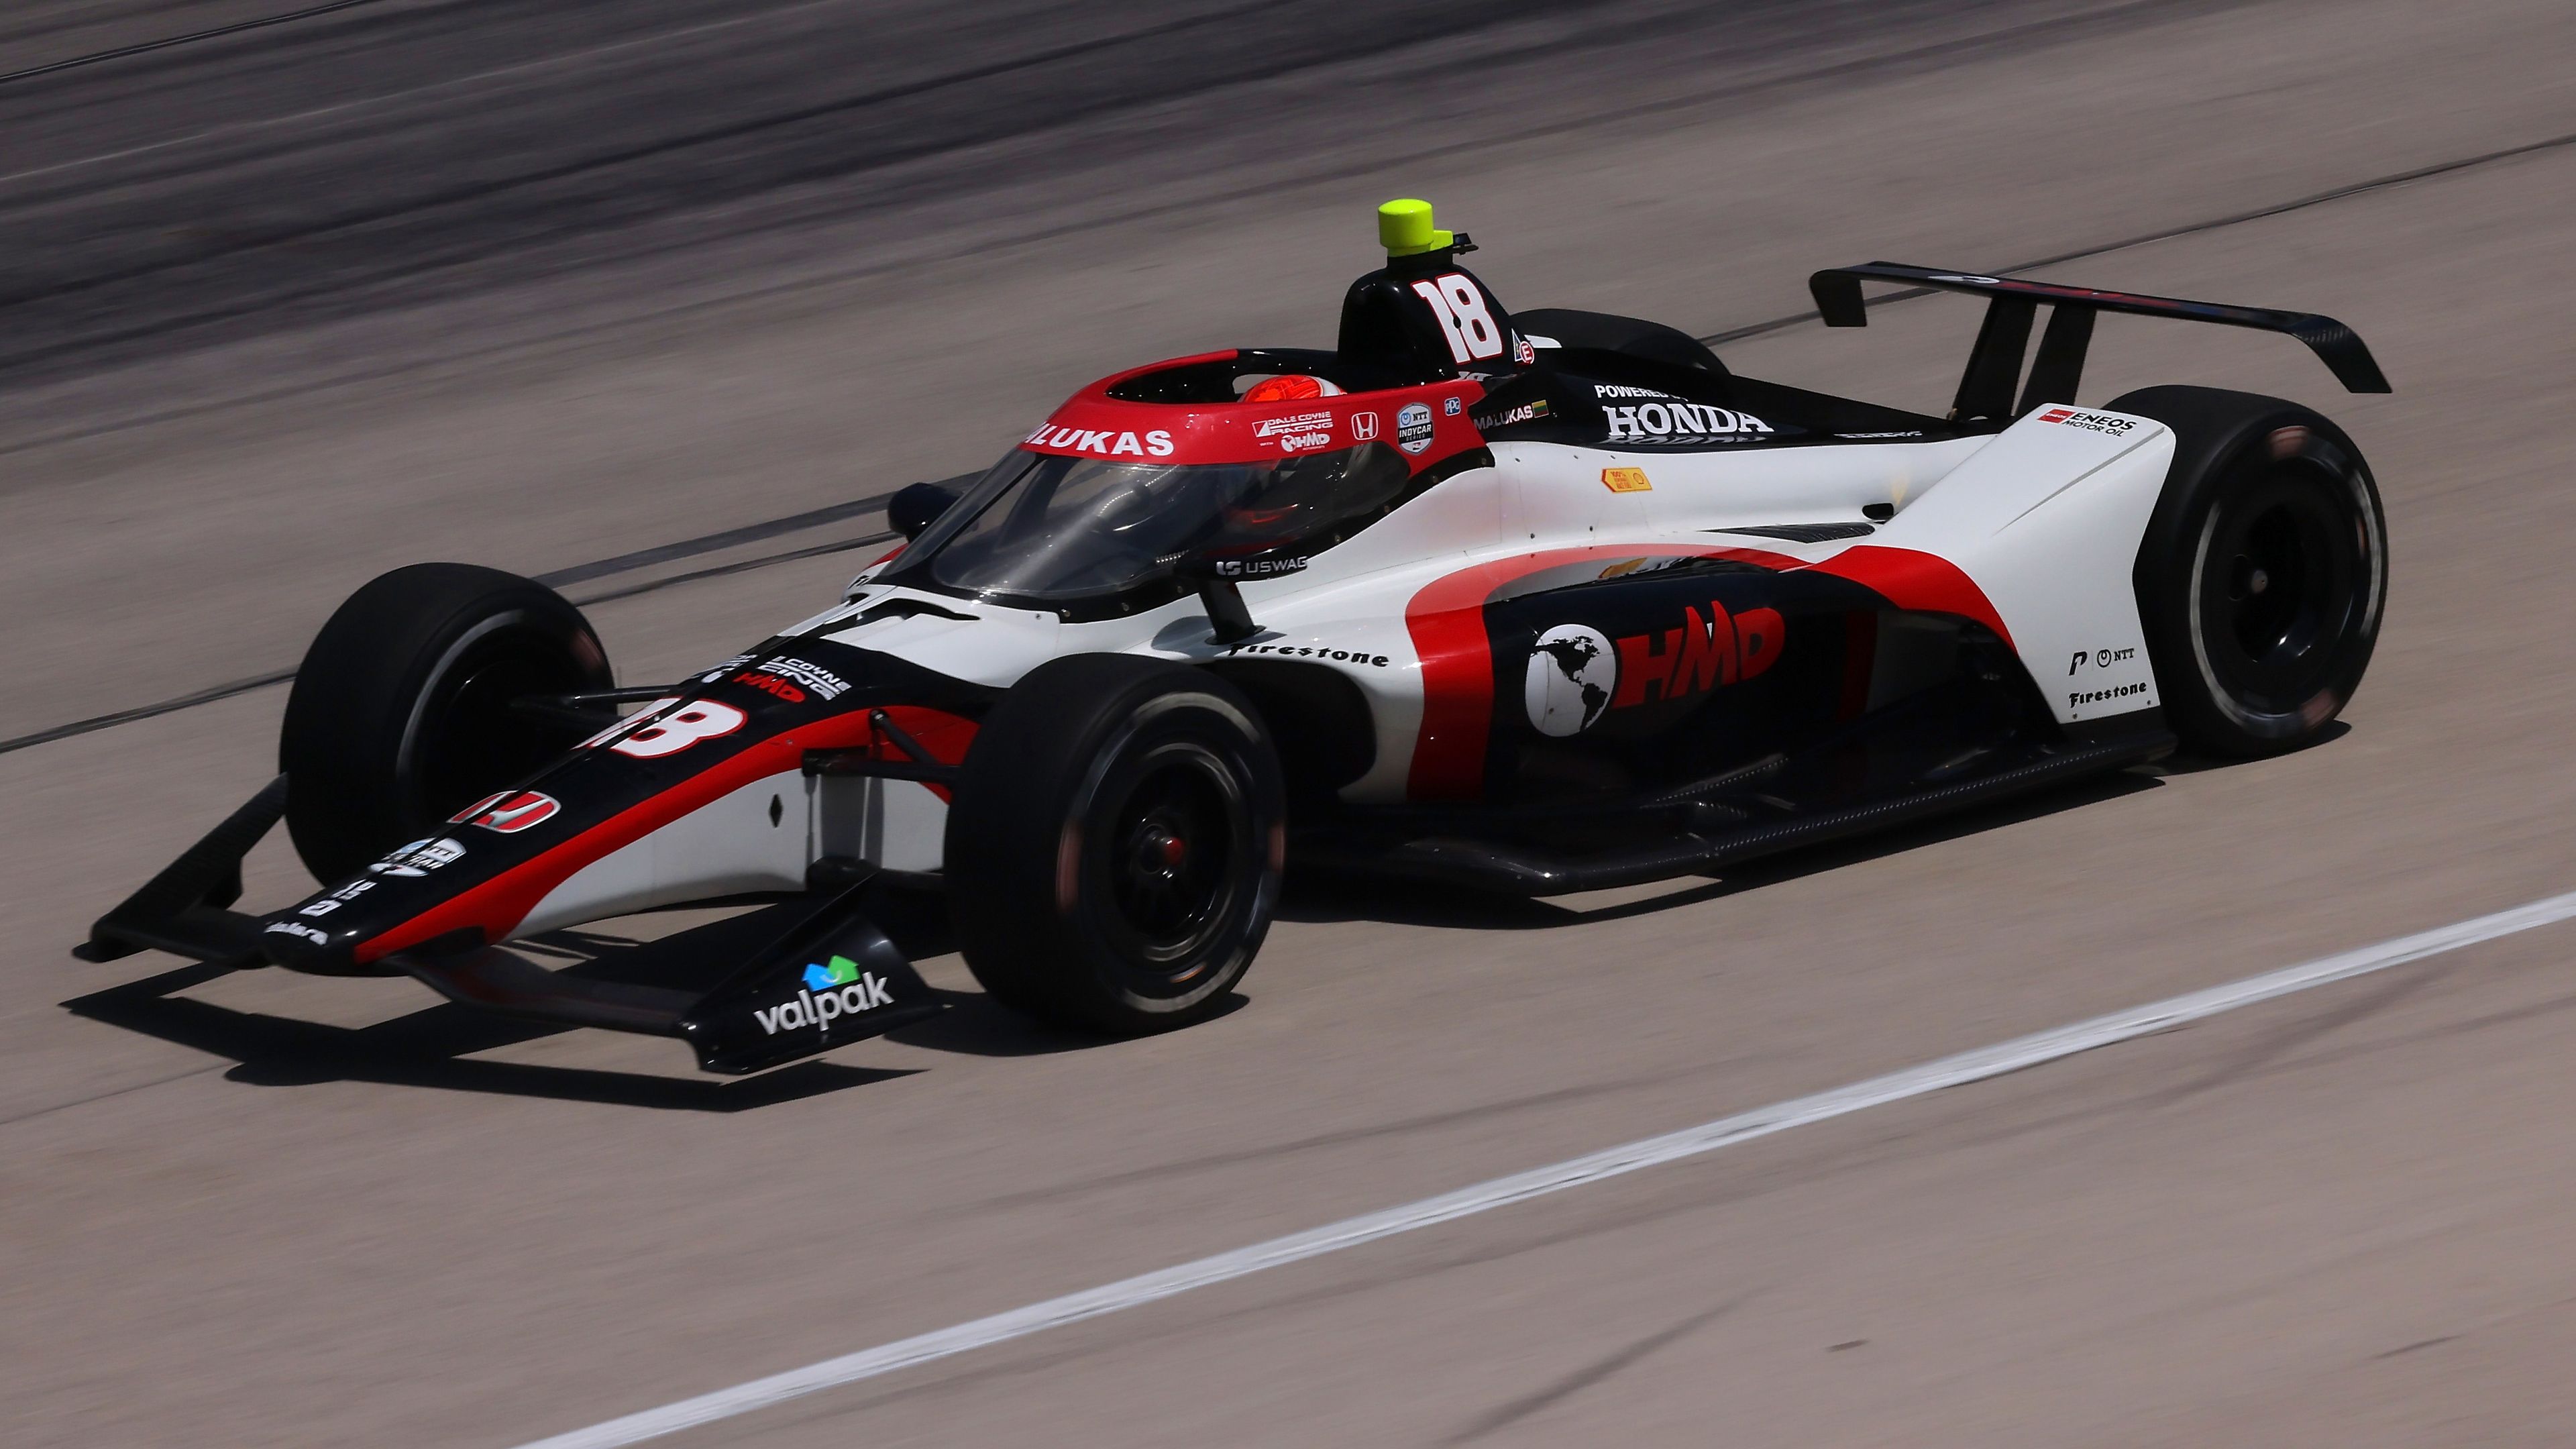 David Malukas finished fourth at Texas Motor Speedway.